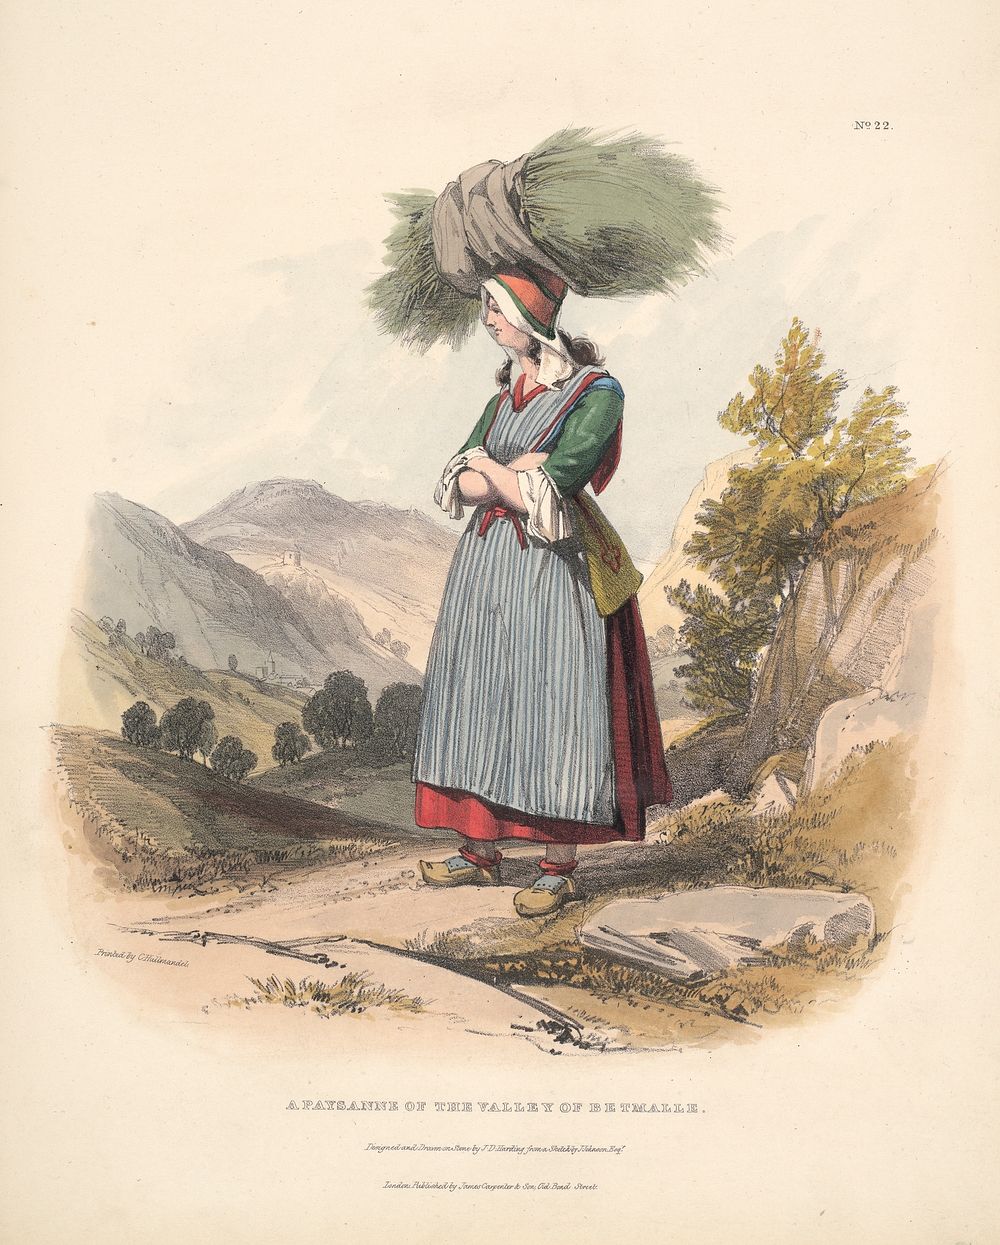 Costumes of the French Pyrenees : drawn on stone by J.D. Harding ; from original sketches by J. Johnson.